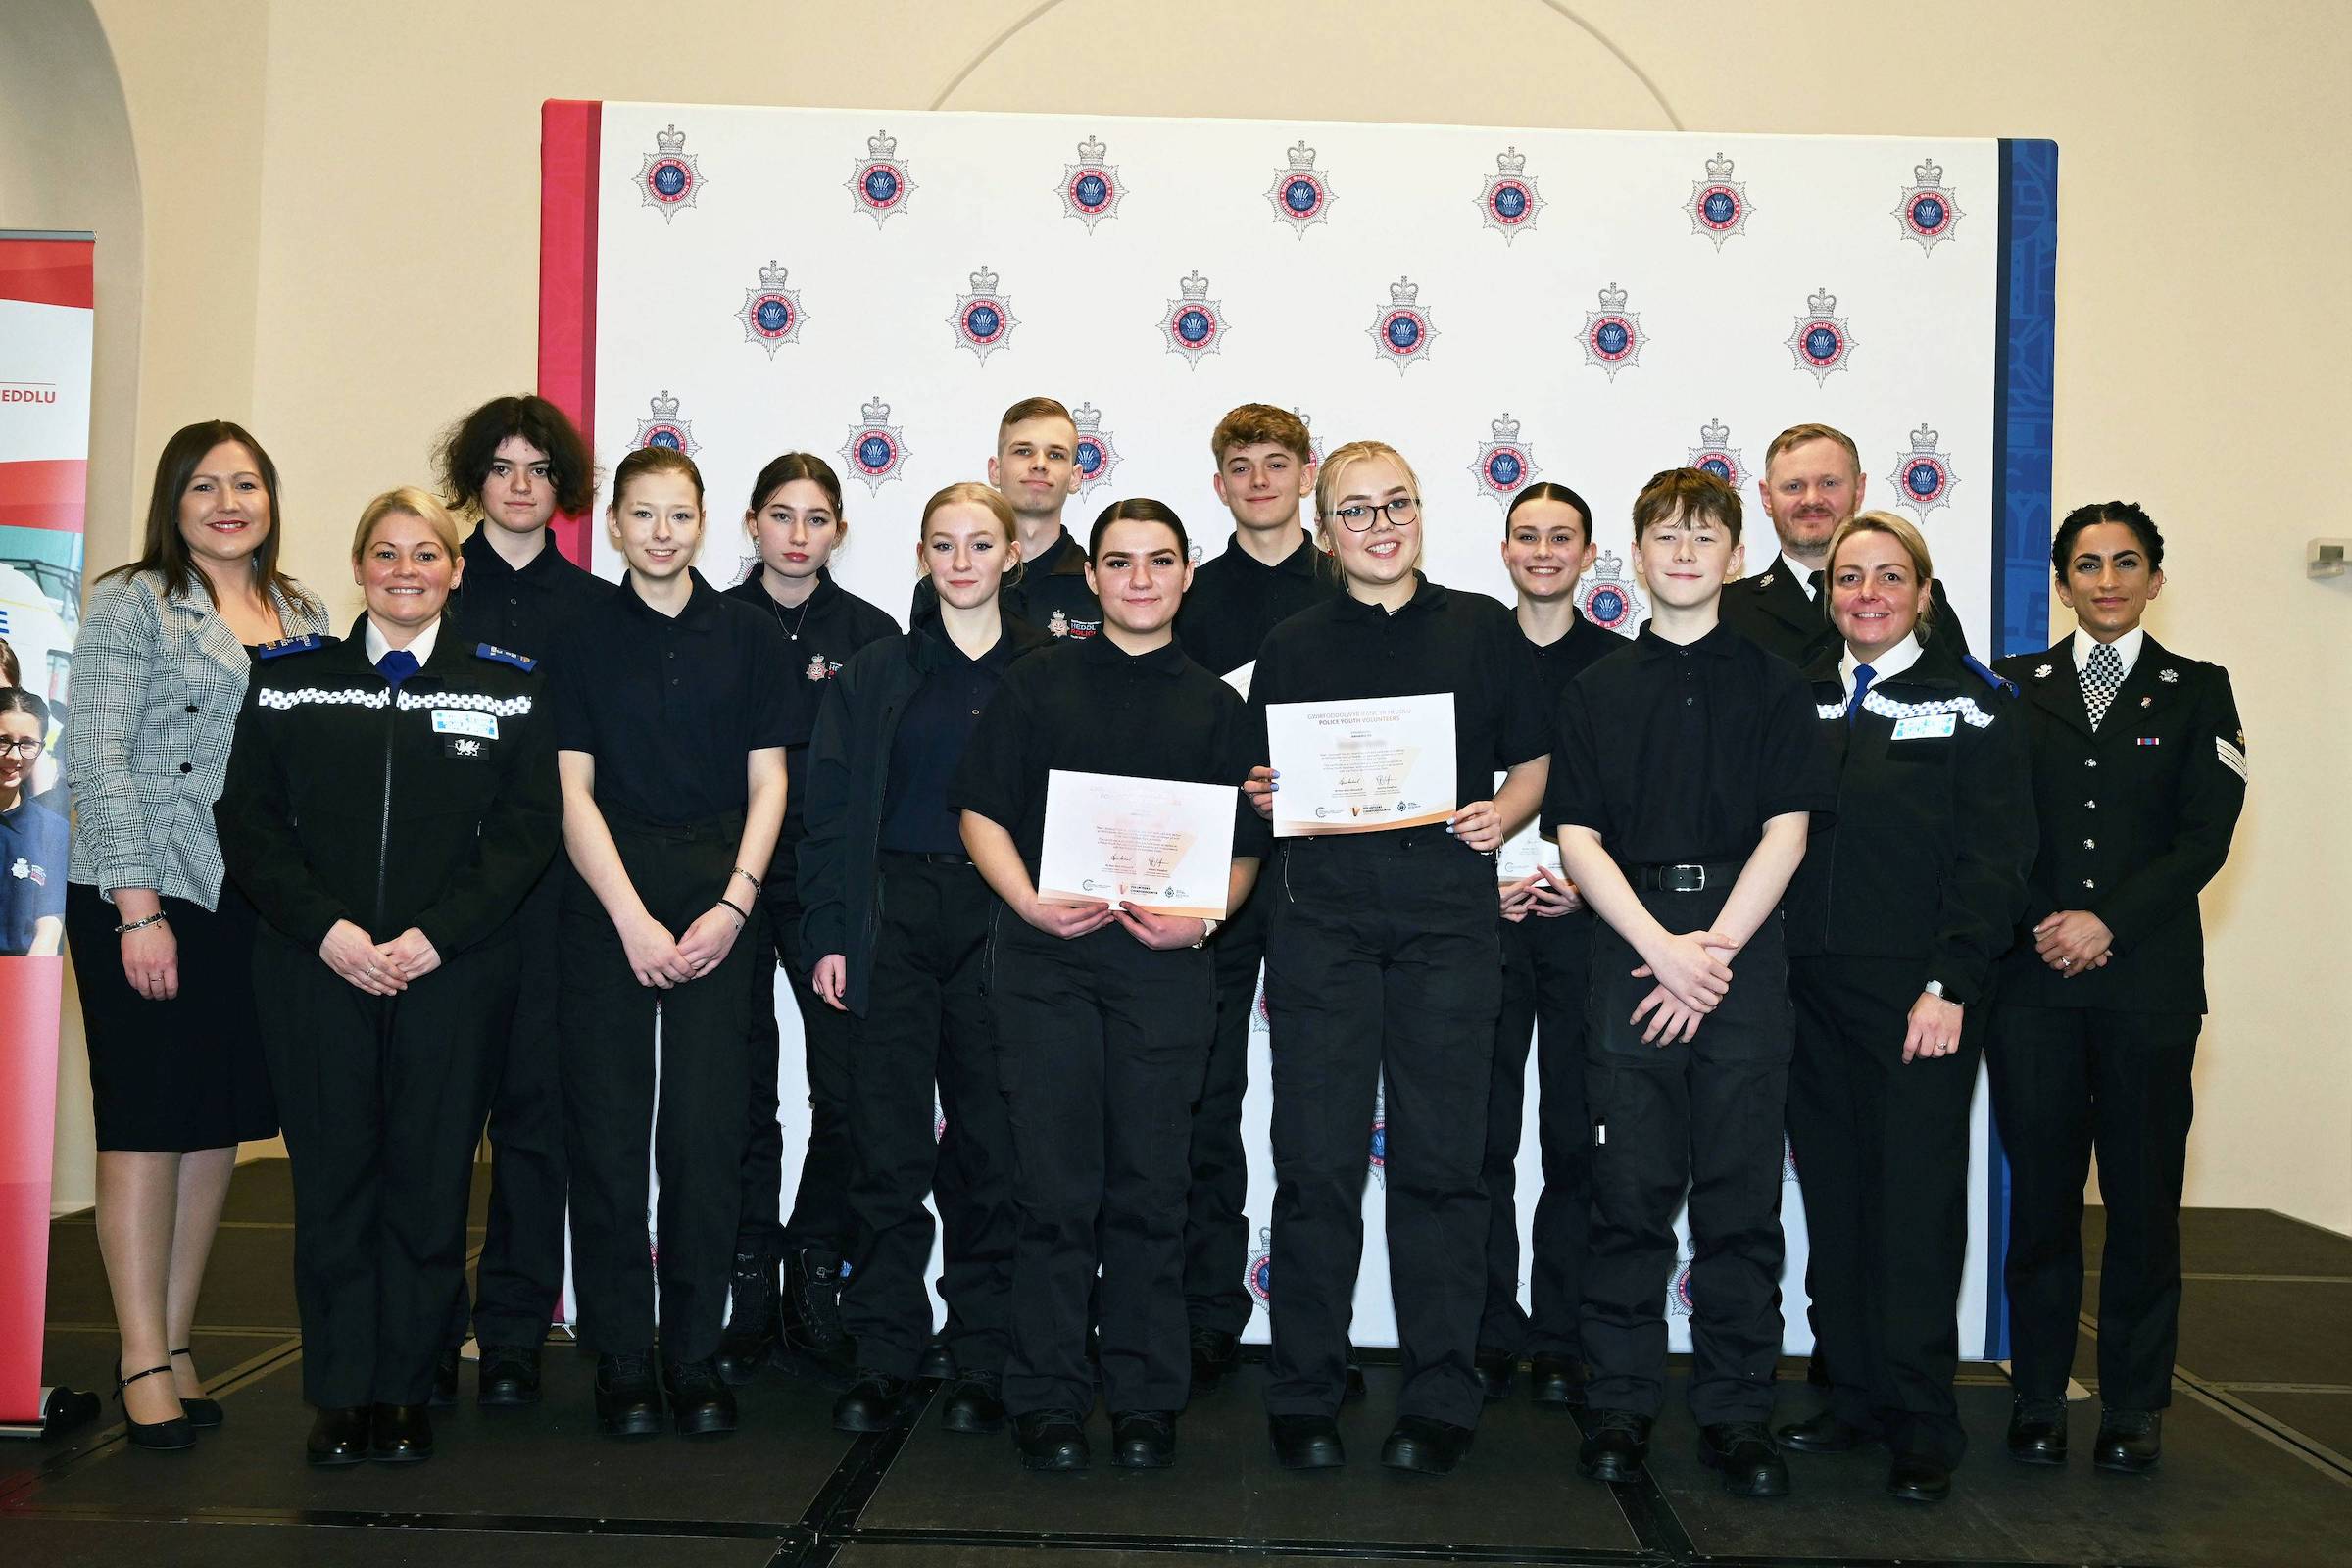 More than 90 young people take Police Youth Volunteer oath and join TeamSWP